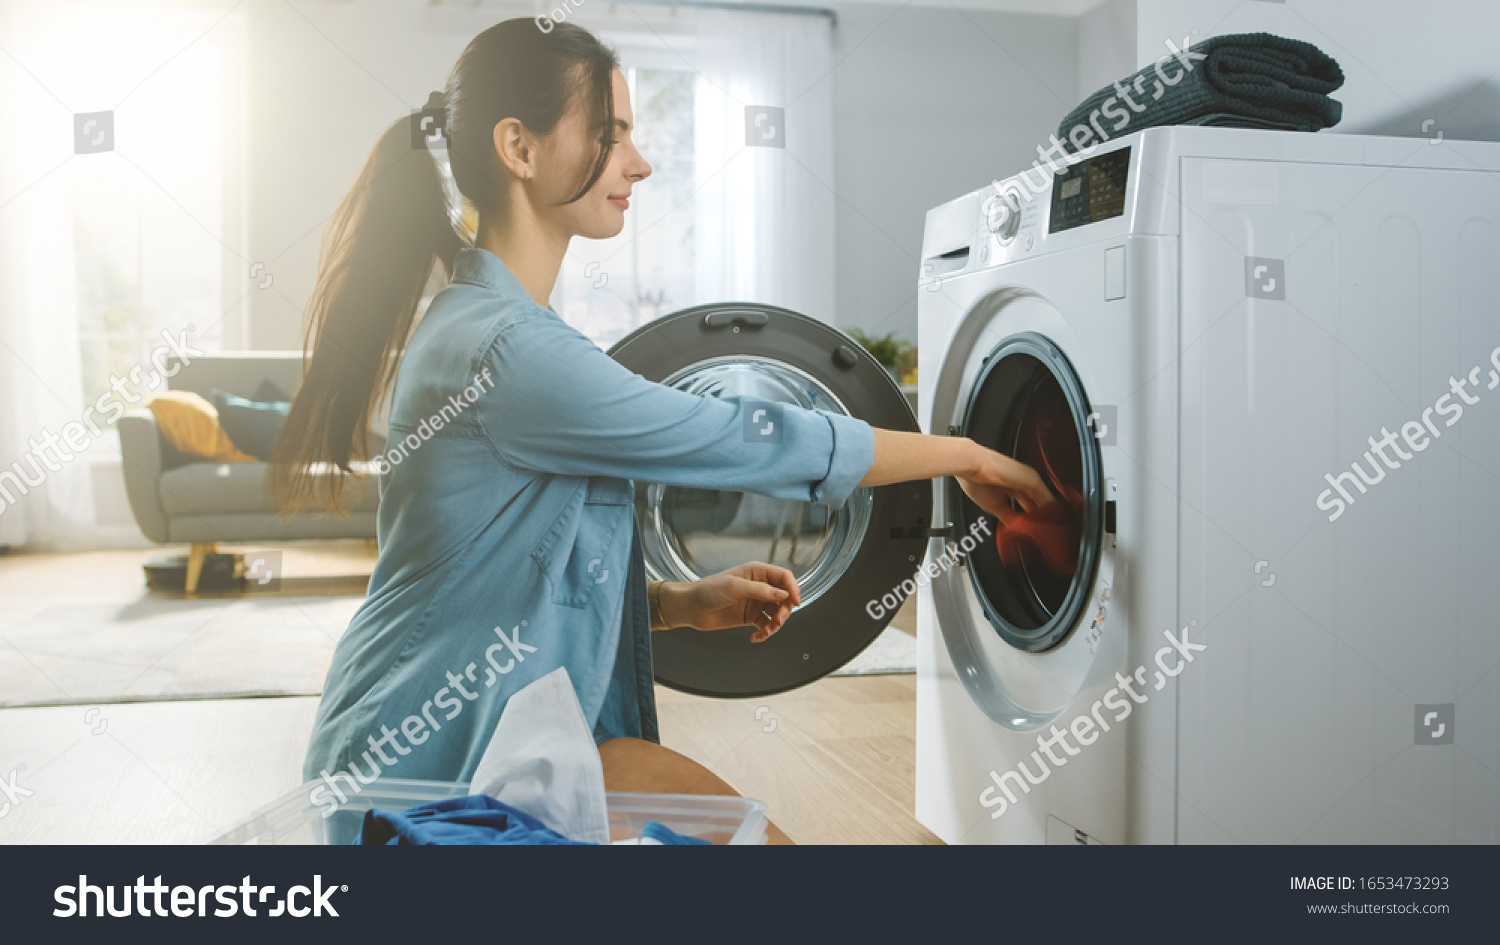 Beautiful Smiling Brunette Young Woman Sits in Front of a Washing Machine in Homely Jeans Clothes. She Loads the Washer with Dirty Laundry. Bright and Spacious Living Room with Modern Interior. #1653473293